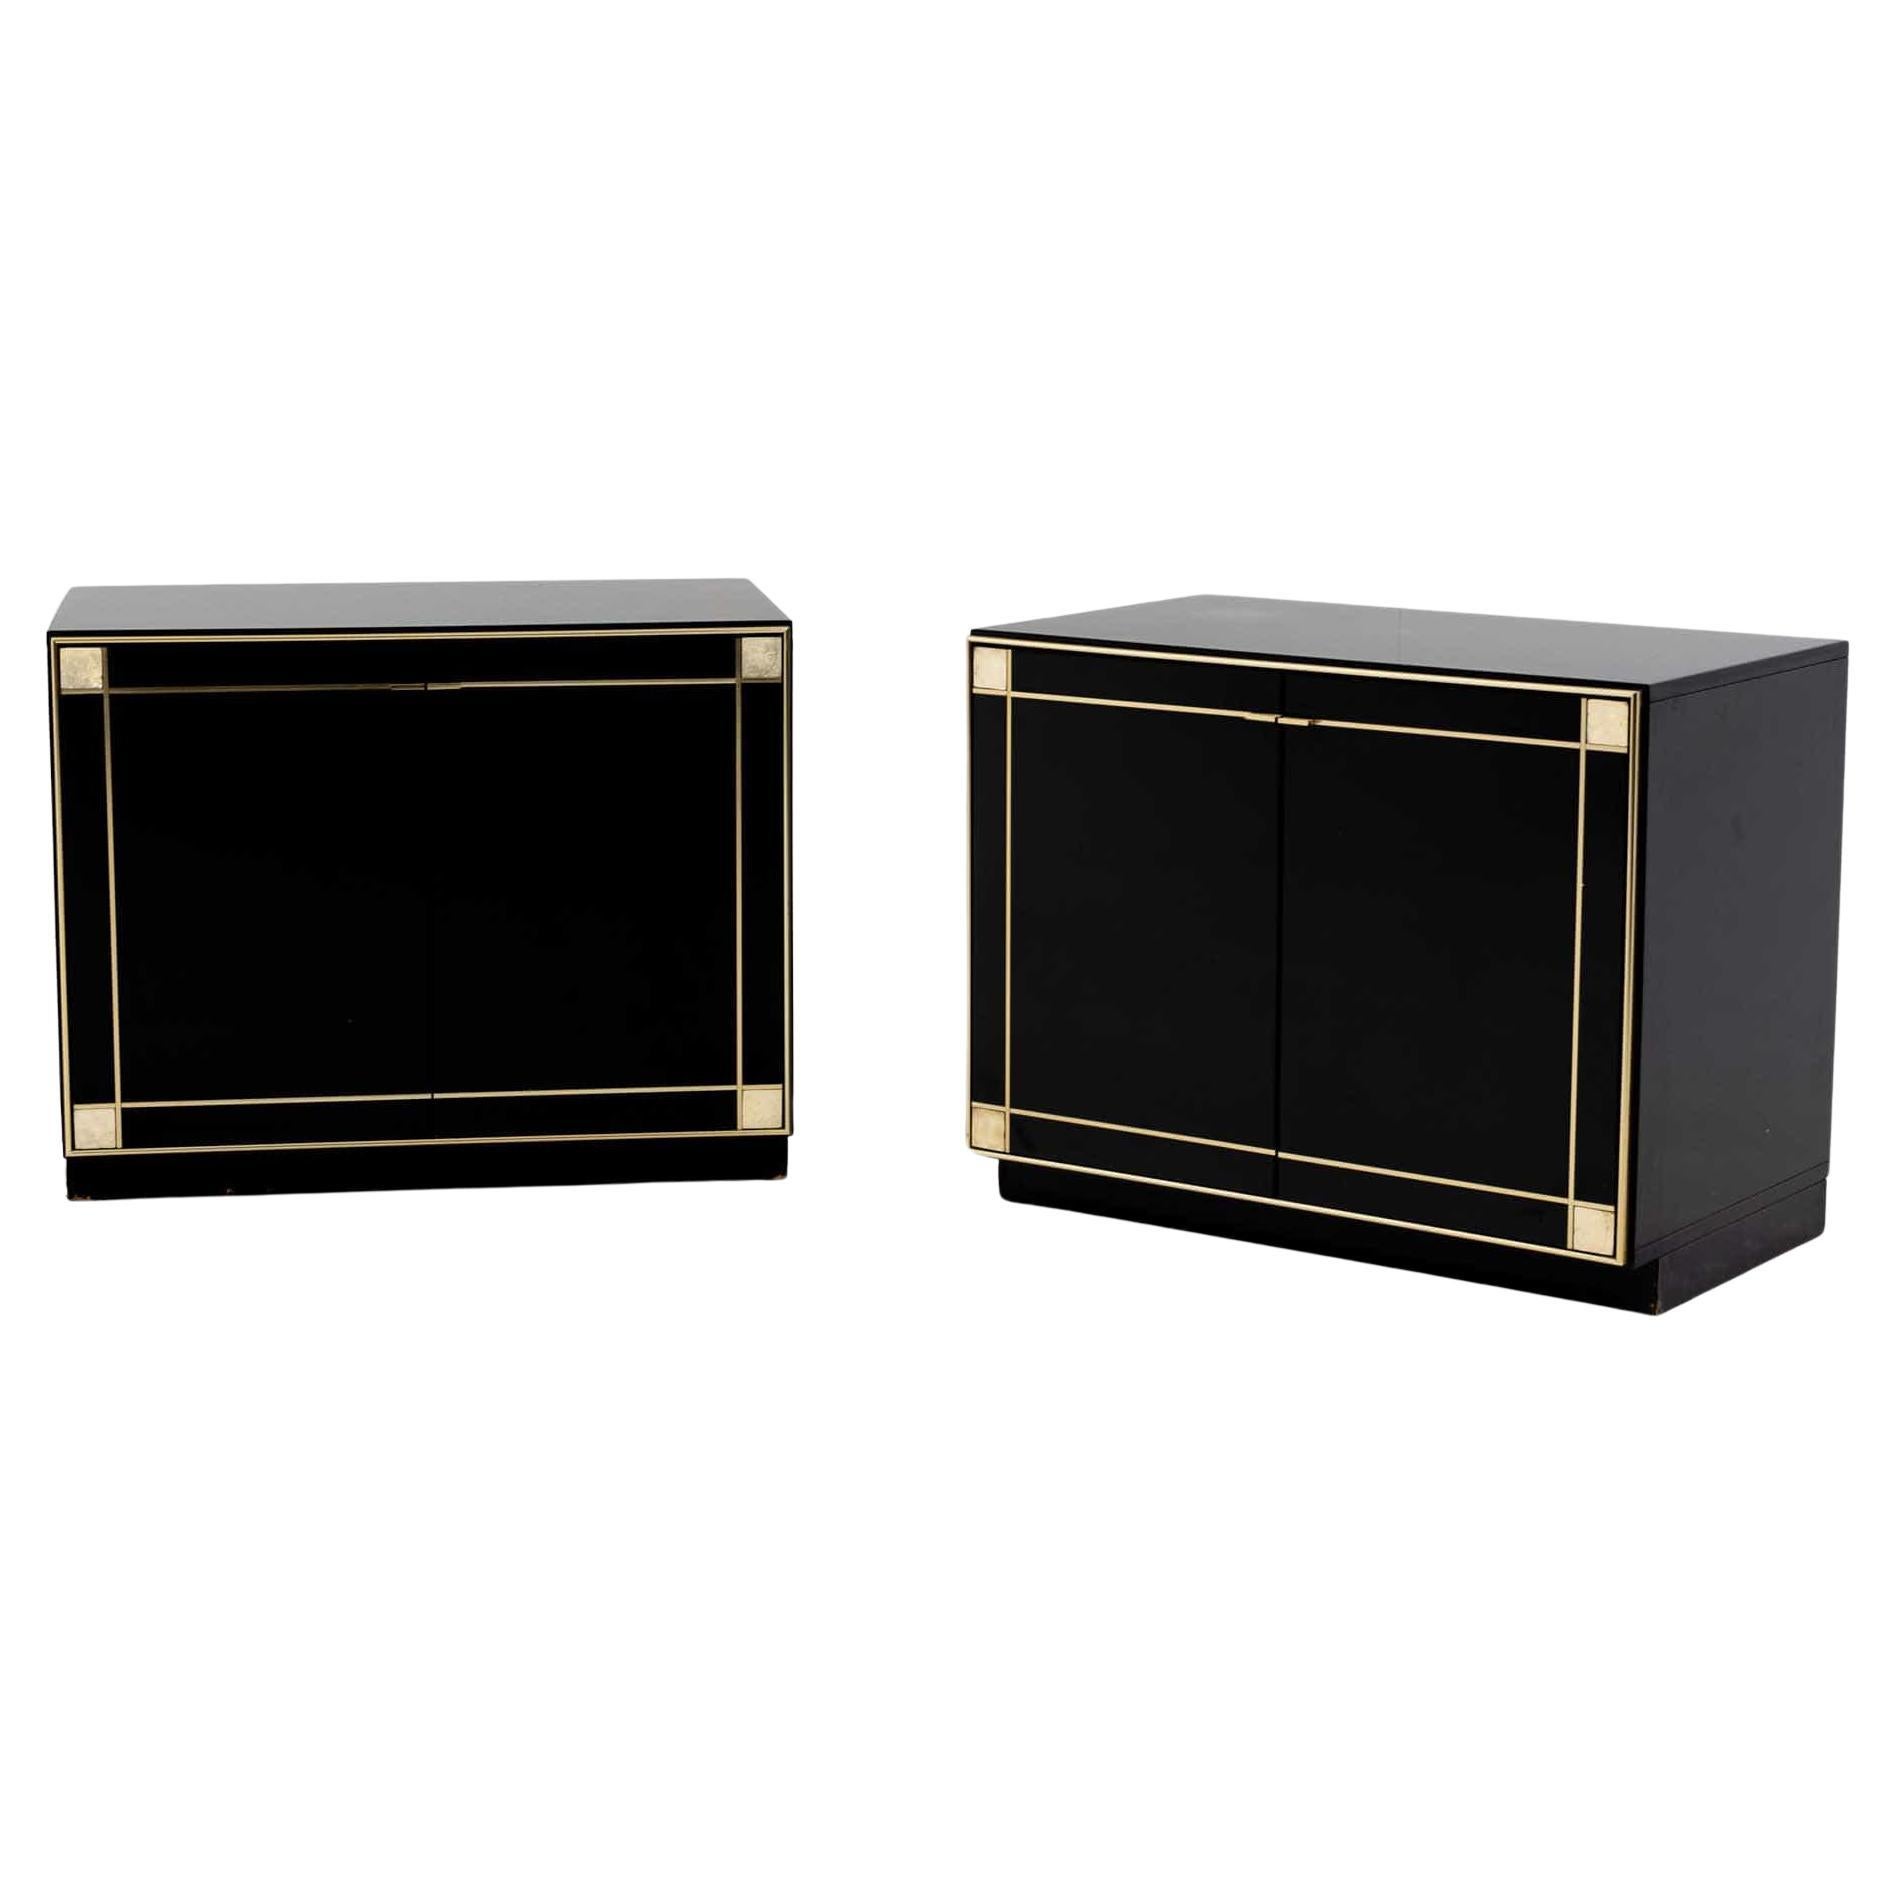 Pair of black lacquered two-door sideboards designed by Pierre Cardin in the 1980s. The sideboards exude an elegant character and are accentuated by brass decorations on the doors. The interior division consists of a shelf.